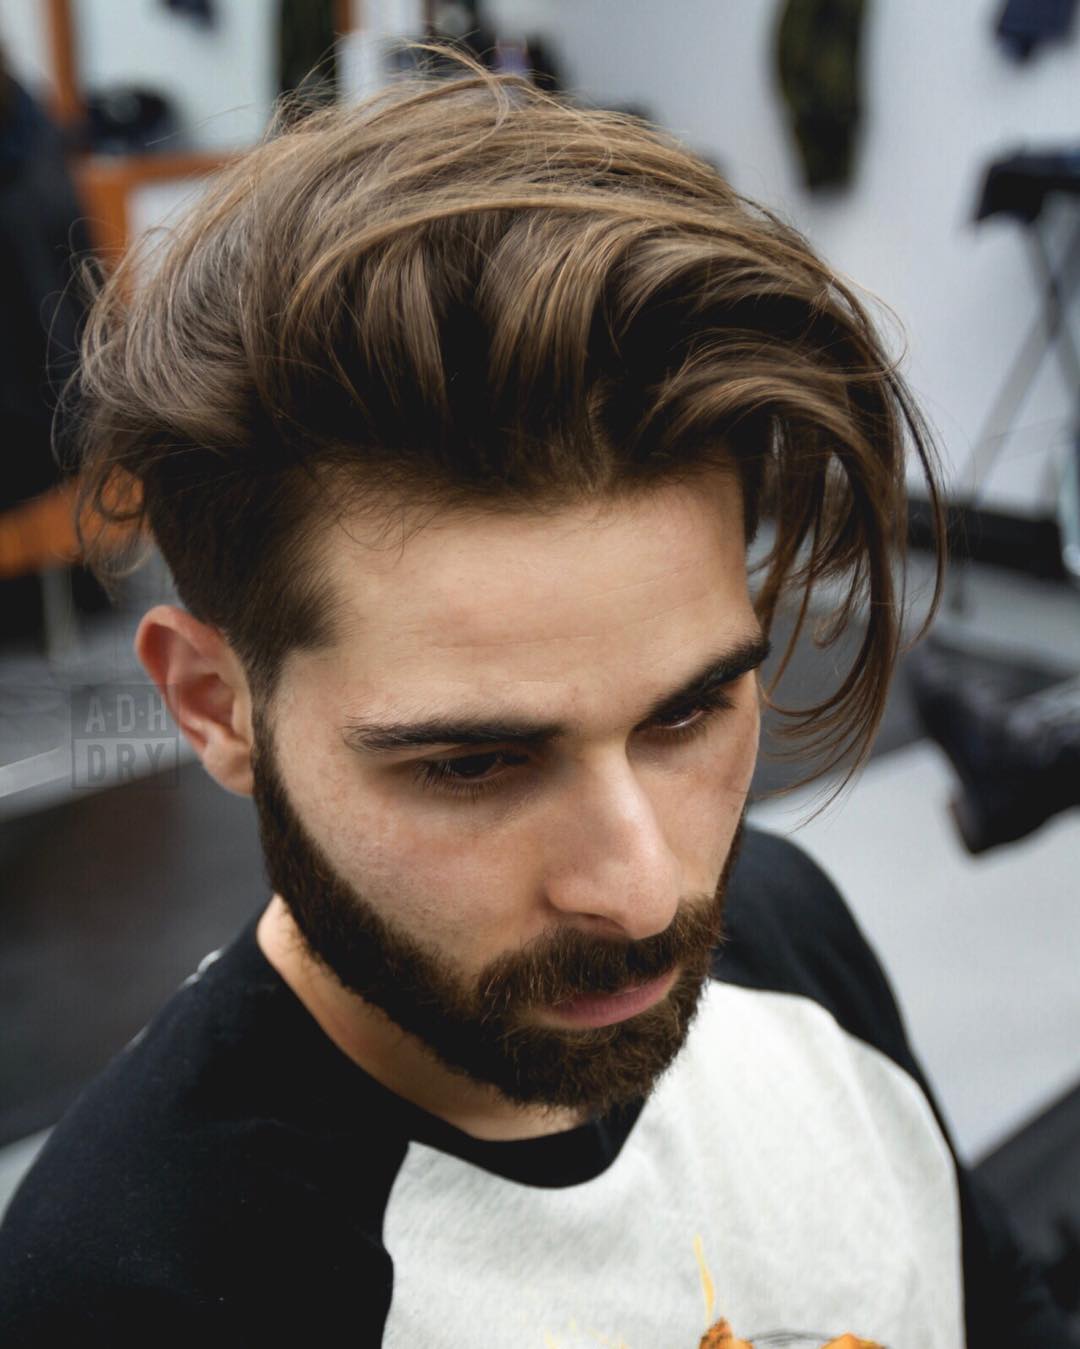 How To Grow Your Hair Out Men S Tutorial